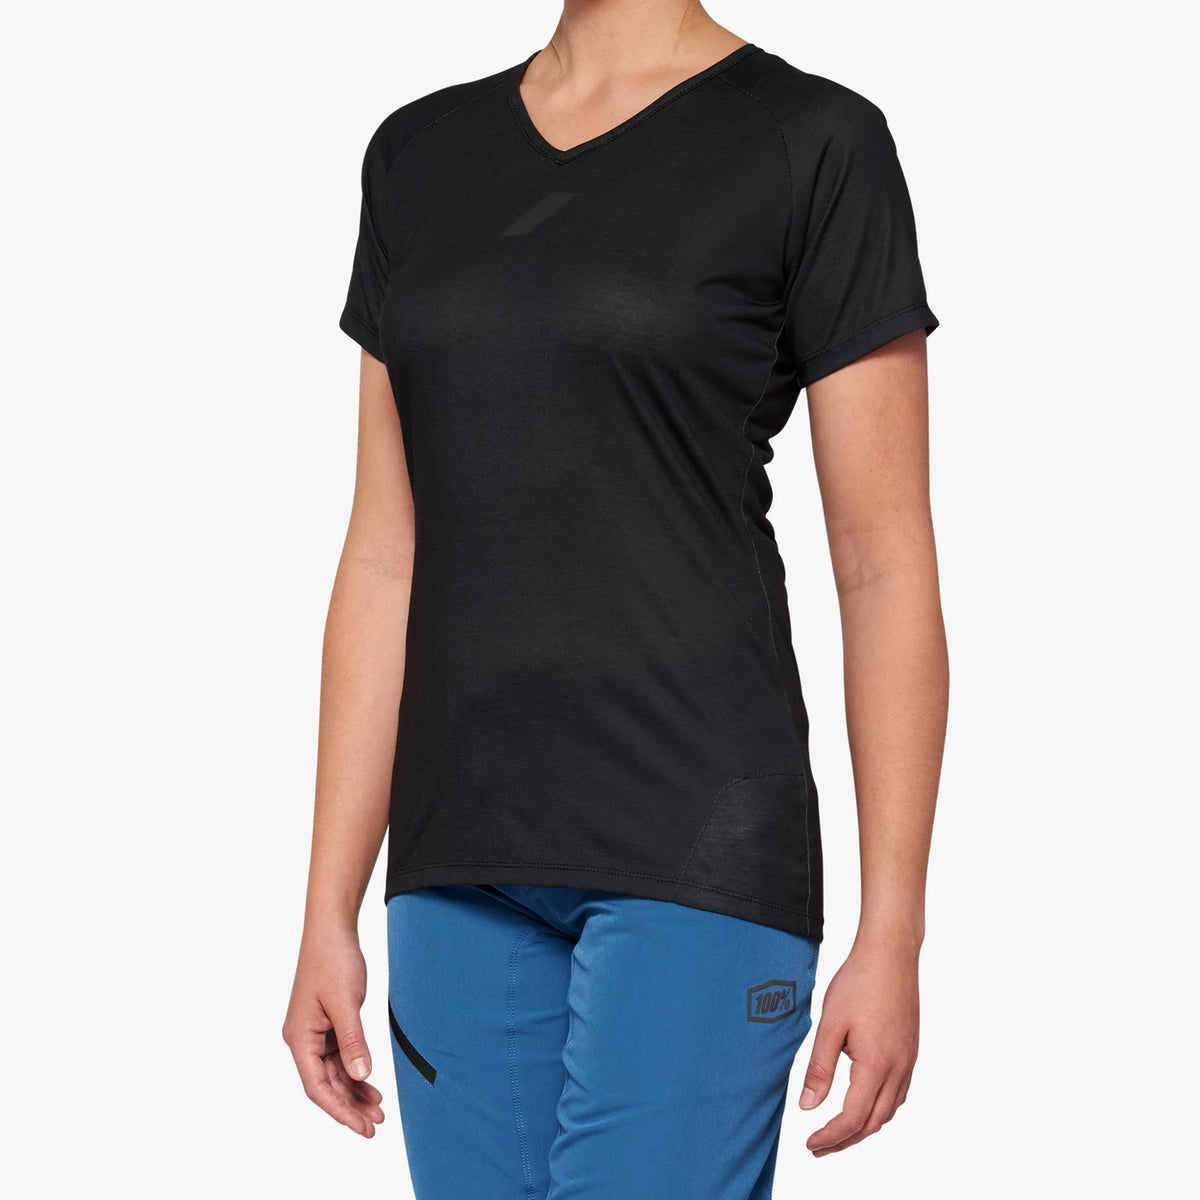 Black Jersey for women 100% airmatic